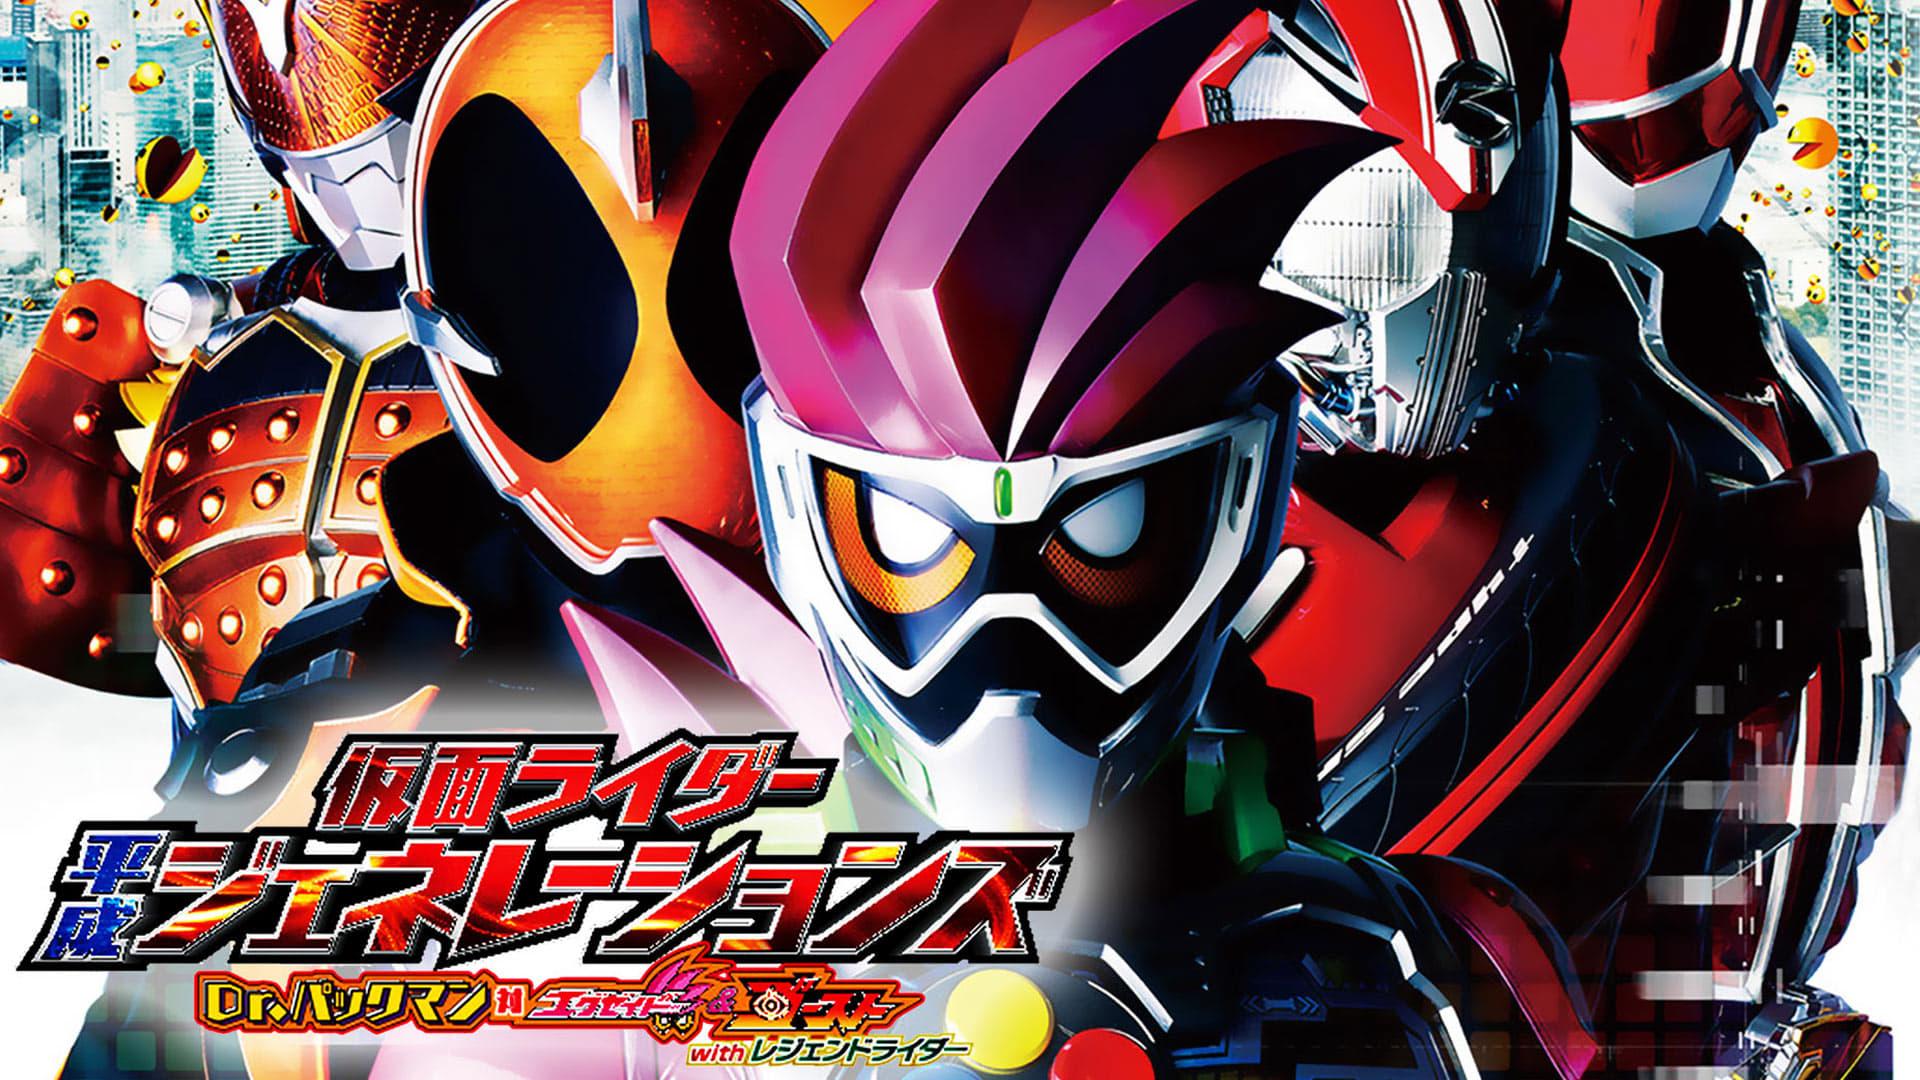 Kamen Rider Heisei Generations: Dr. Pac-Man vs. Ex-Aid & Ghost with Legend Riders backdrop